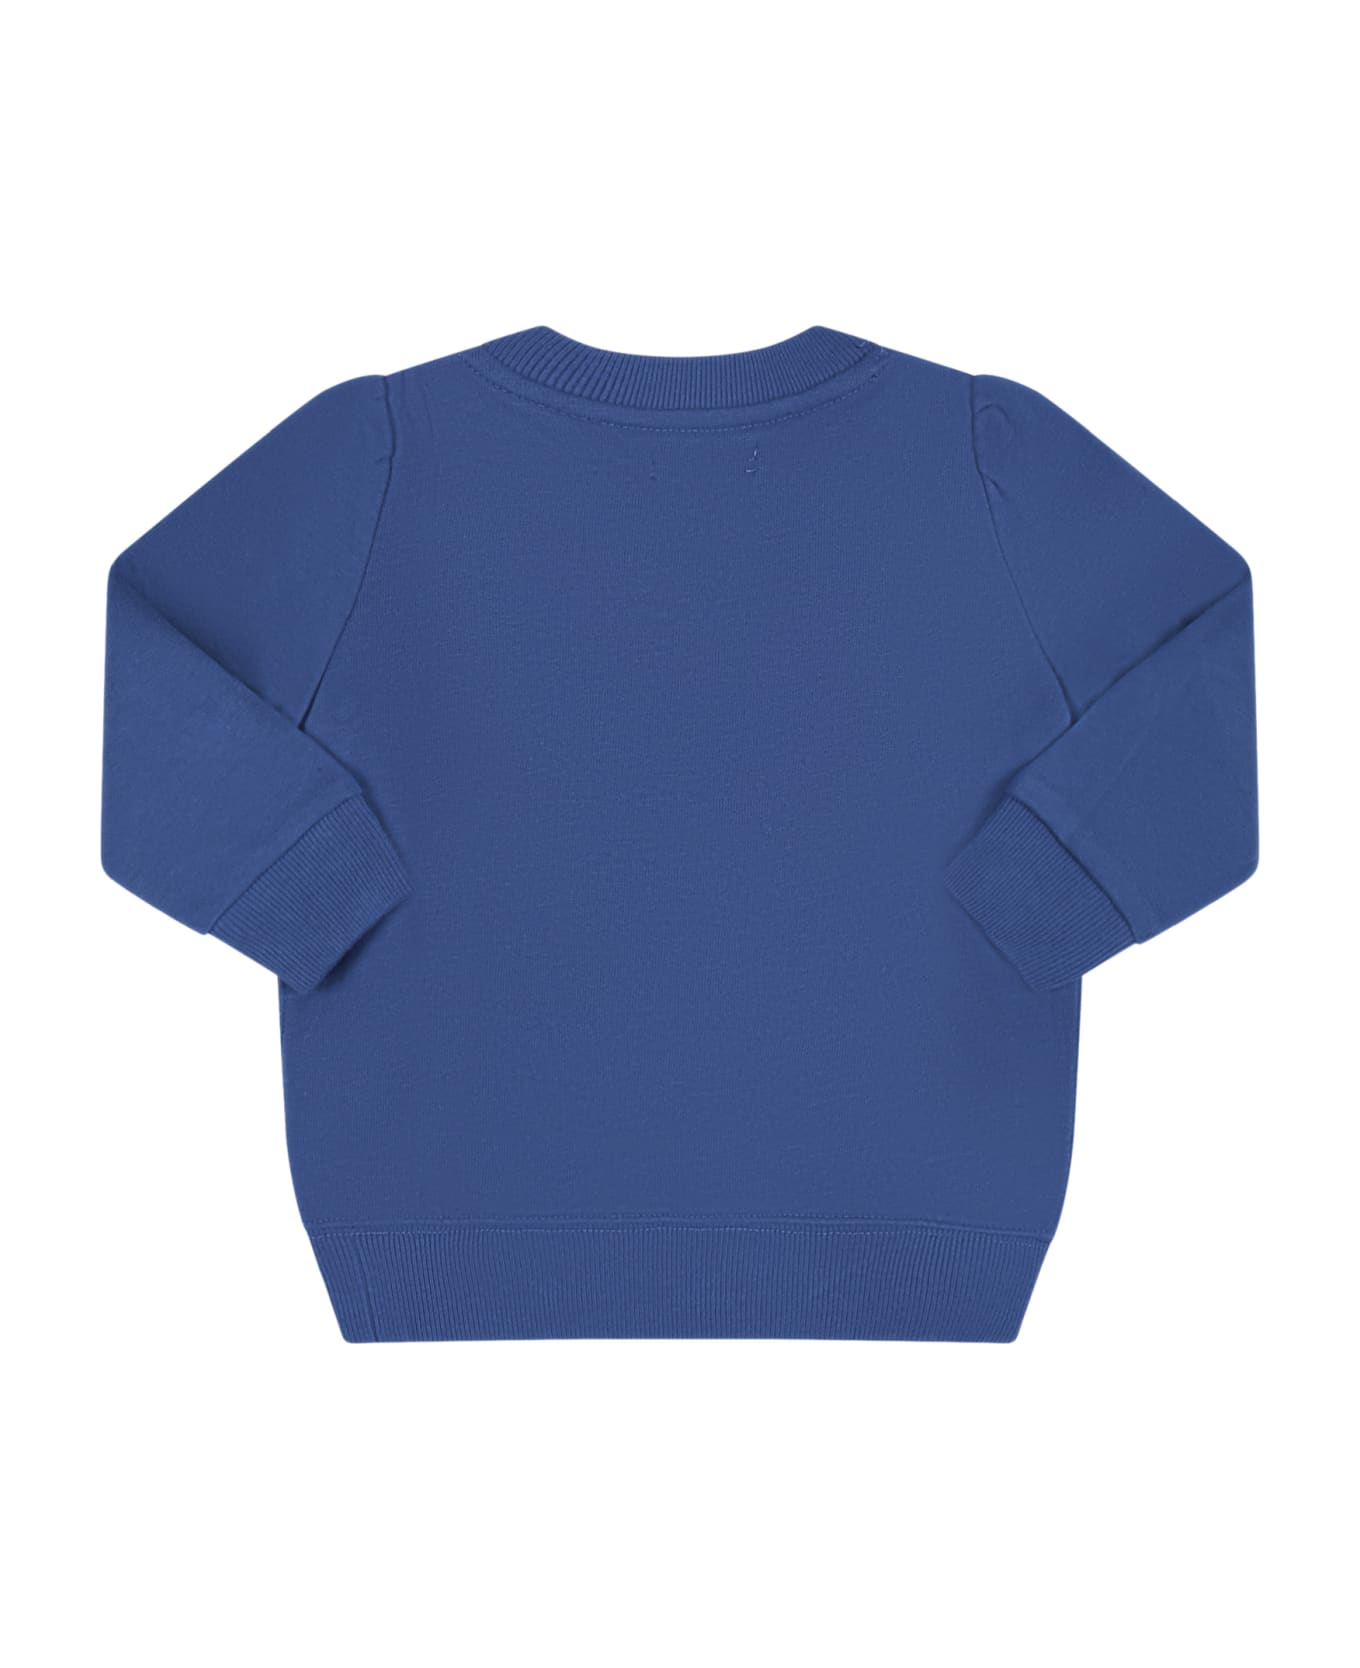 Ralph Lauren Blue Sweatshirt For Baby Girl With Polo Bear And White Logo - Blue